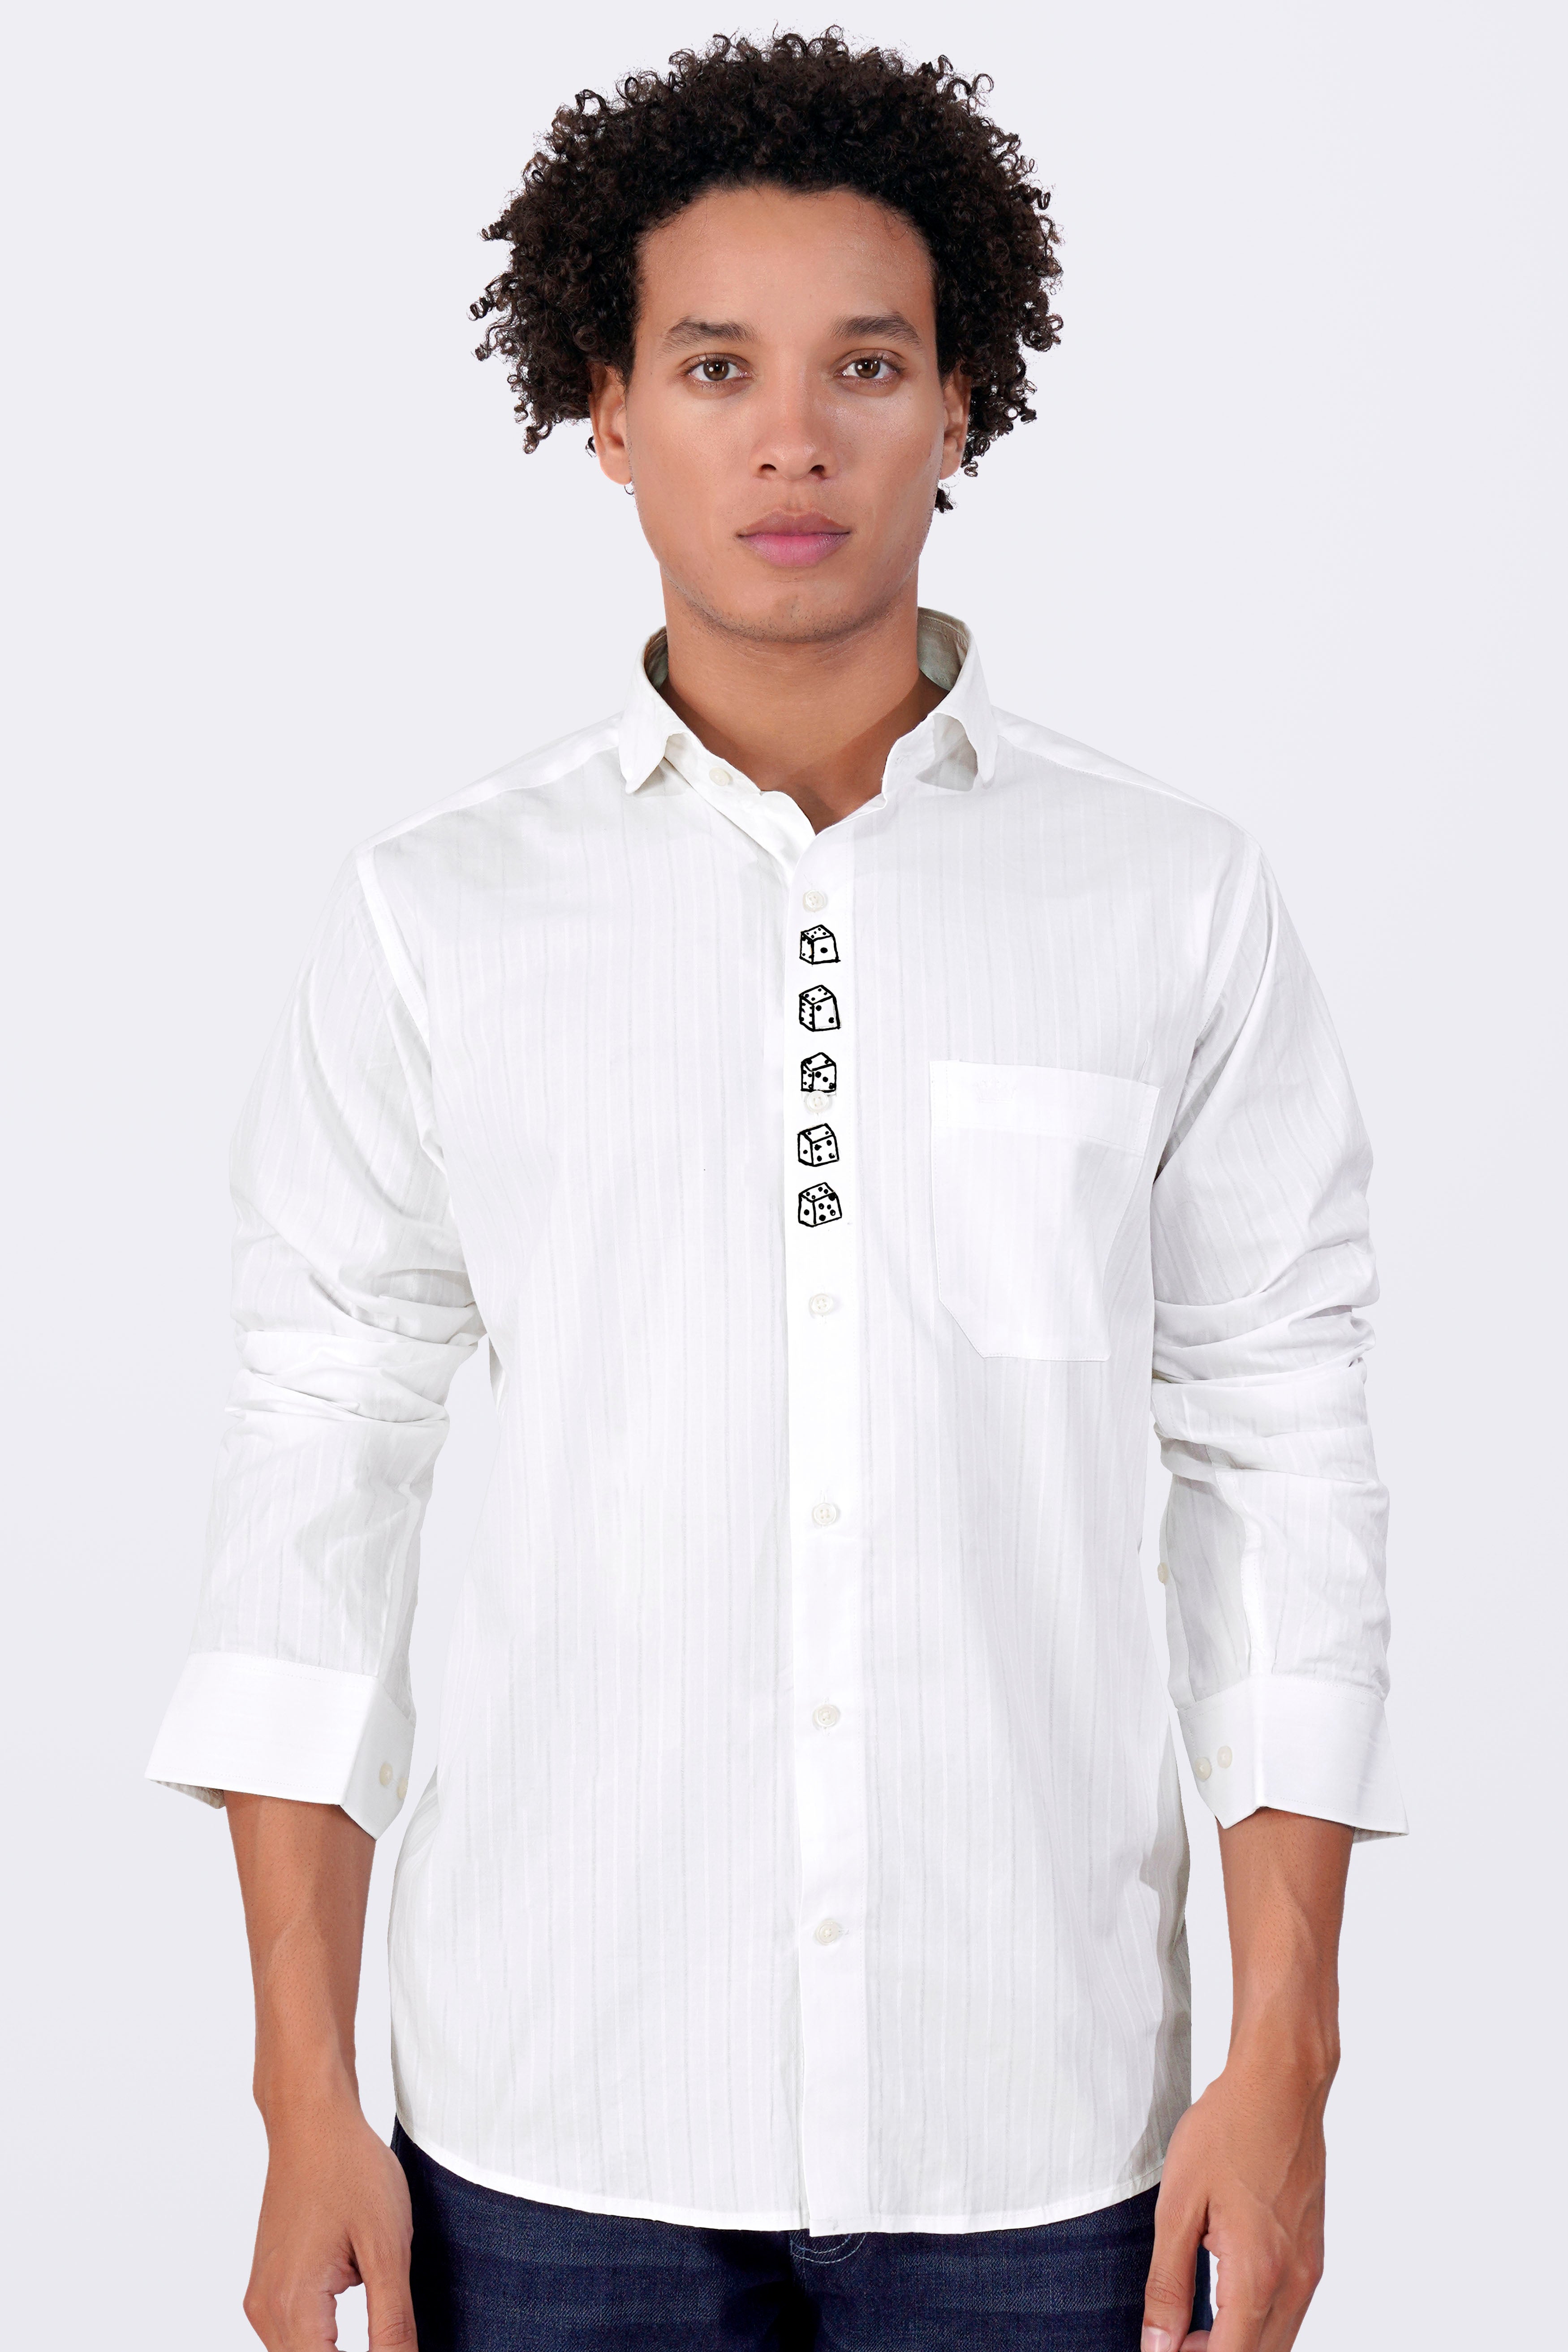 Bright White Striped with Dices Hand Painted Dobby Premium Giza Cotton Designer Shirt 6163-CA-ART-38, 6163-CA-ART-H-38, 6163-CA-ART-39, 6163-CA-ART-H-39, 6163-CA-ART-40, 6163-CA-ART-H-40, 6163-CA-ART-42, 6163-CA-ART-H-42, 6163-CA-ART-44, 6163-CA-ART-H-44, 6163-CA-ART-46, 6163-CA-ART-H-46, 6163-CA-ART-48, 6163-CA-ART-H-48, 6163-CA-ART-50, 6163-CA-ART-H-50, 6163-CA-ART-52, 6163-CA-ART-H-52